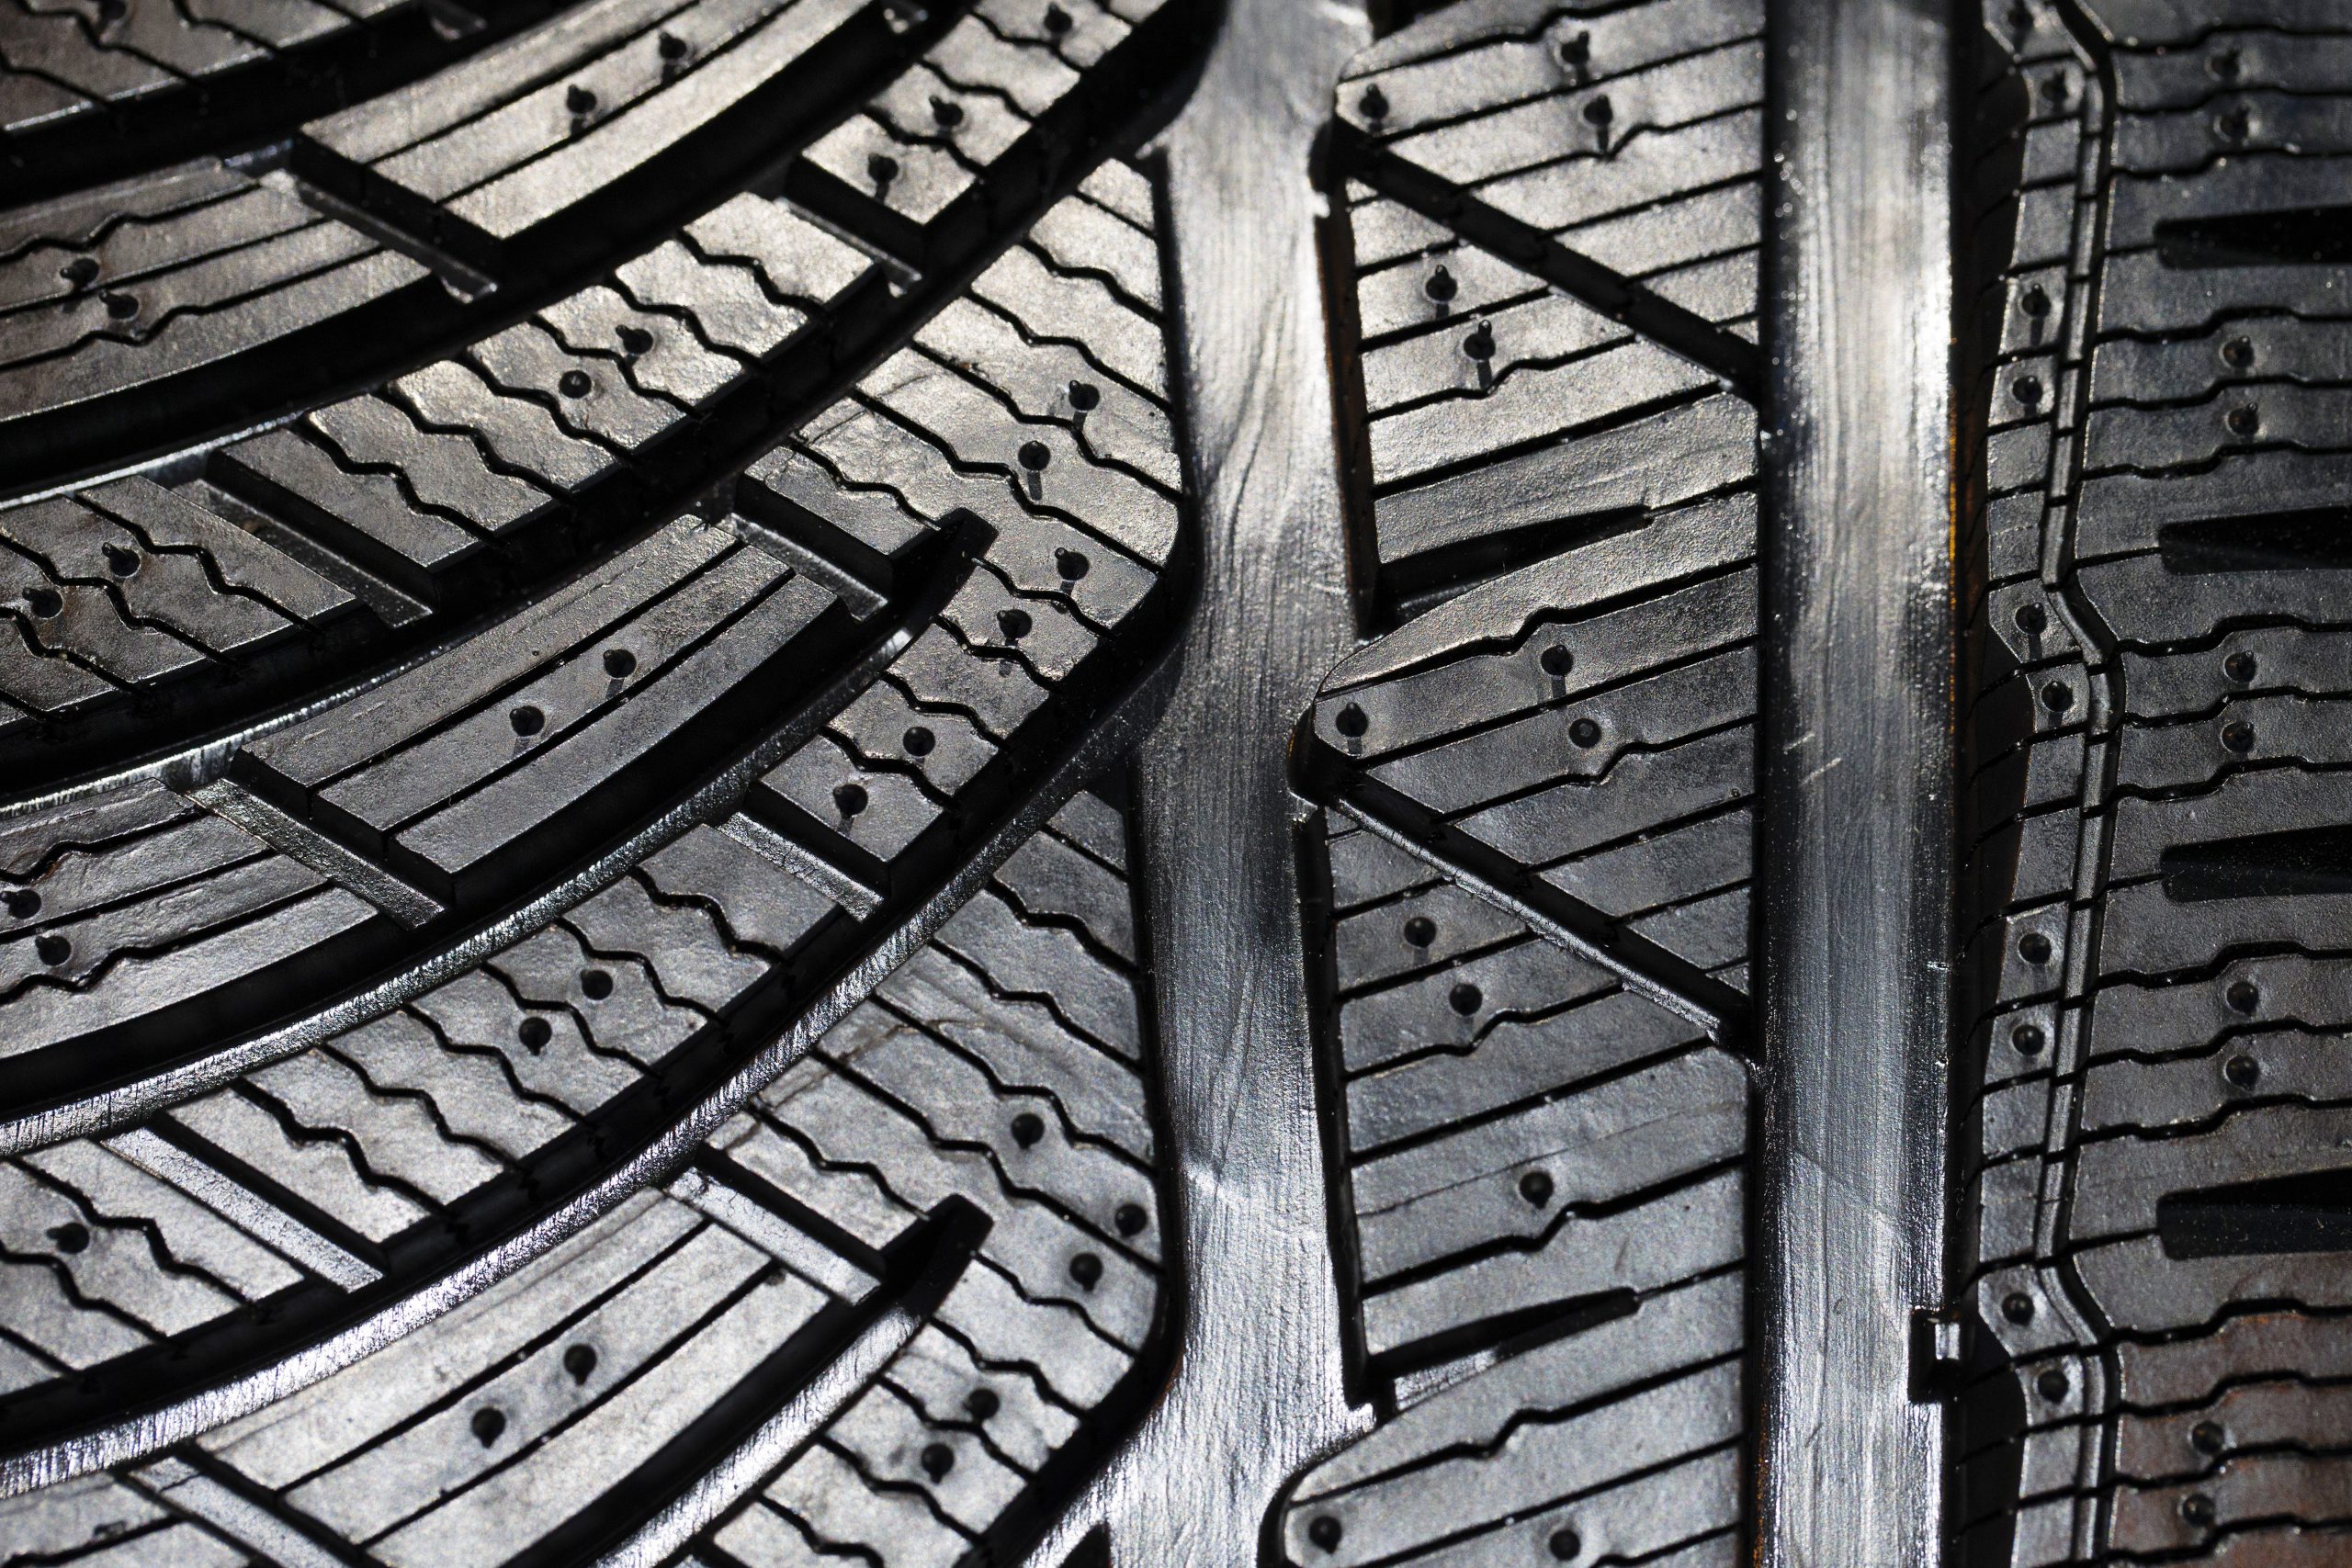 Coming soon: The facility taking tire recycling towards 100%